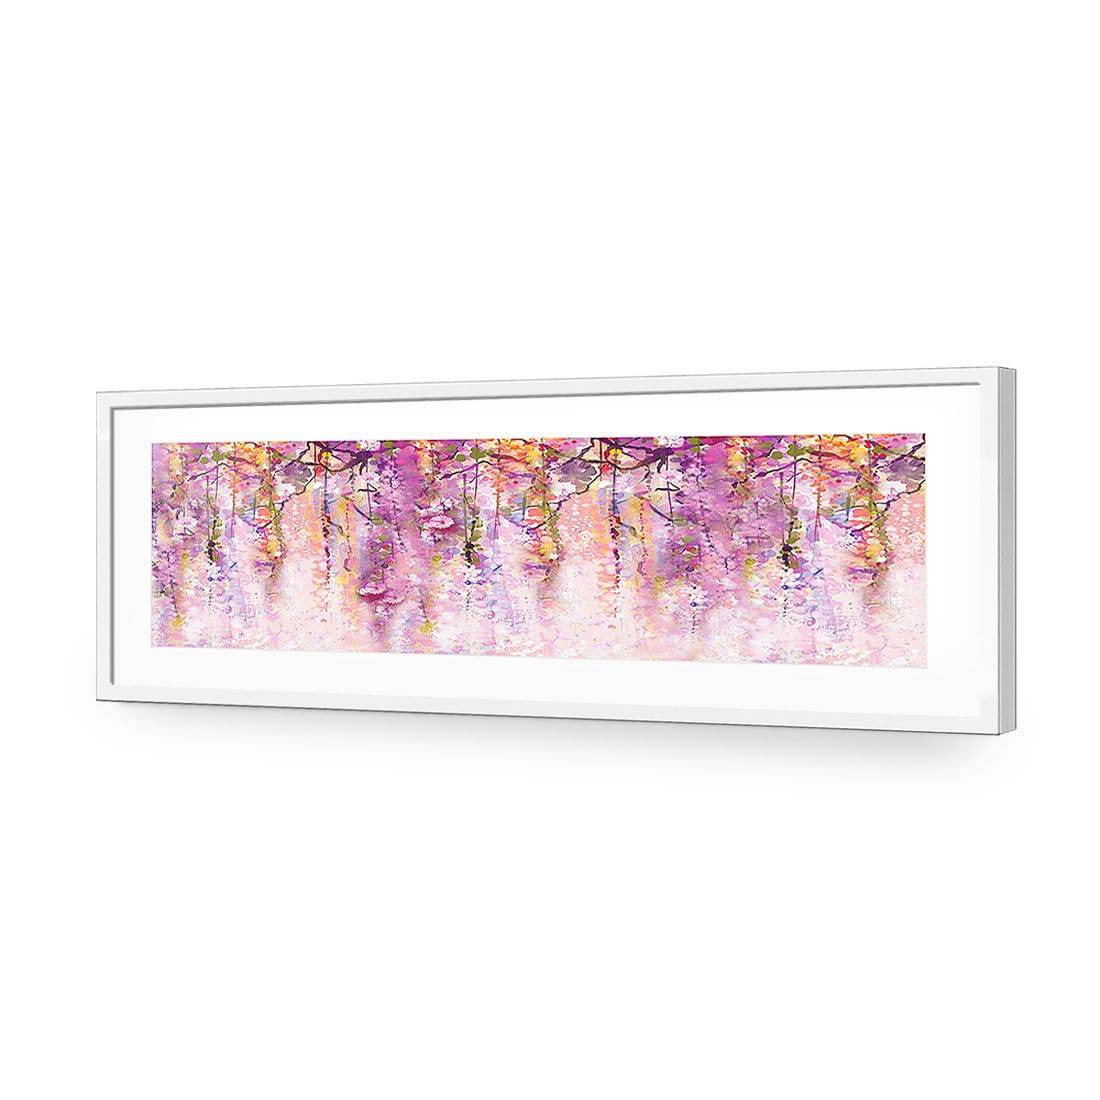 Lilac Dream, Long-Acrylic-Wall Art Design-With Border-Acrylic - White Frame-60x20cm-Wall Art Designs